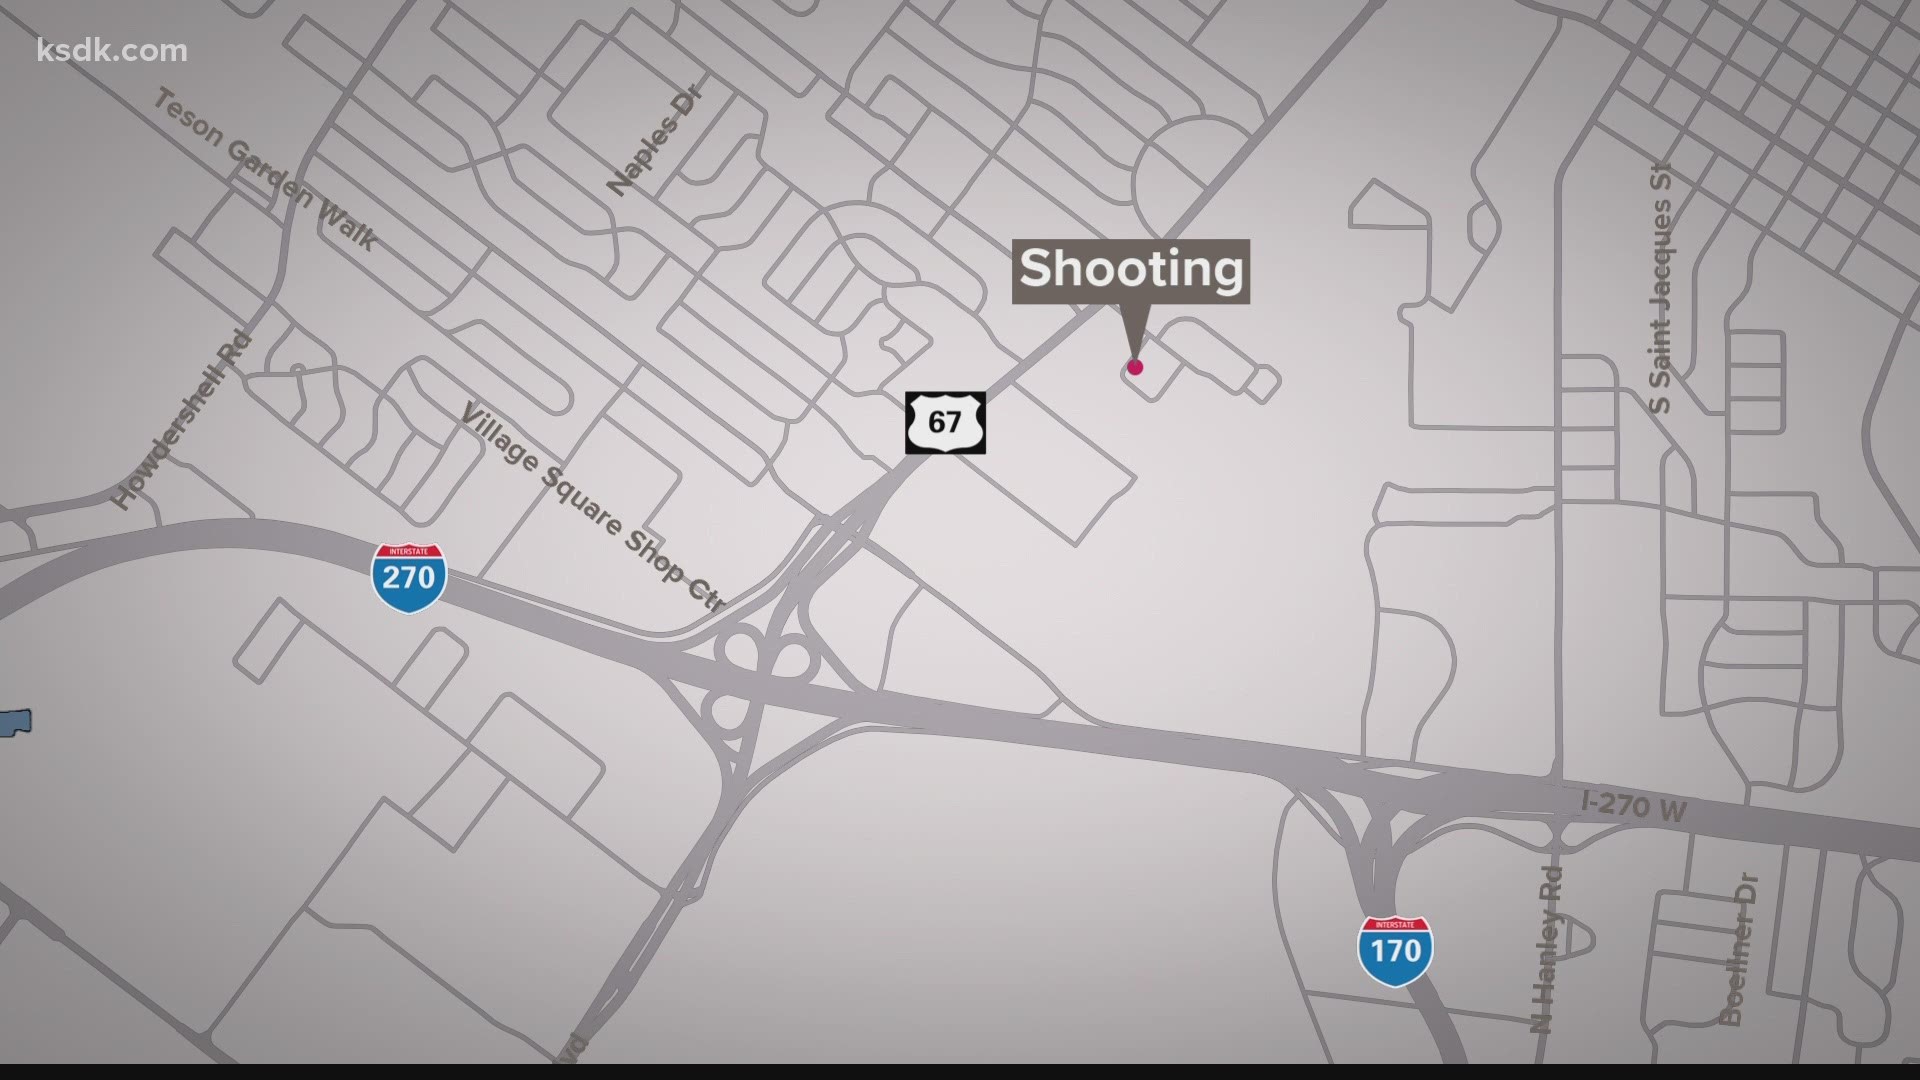 Police were called to the 7800 block of Chamlette Drive around 4:20 p.m. where the teen was found with gunshot wounds